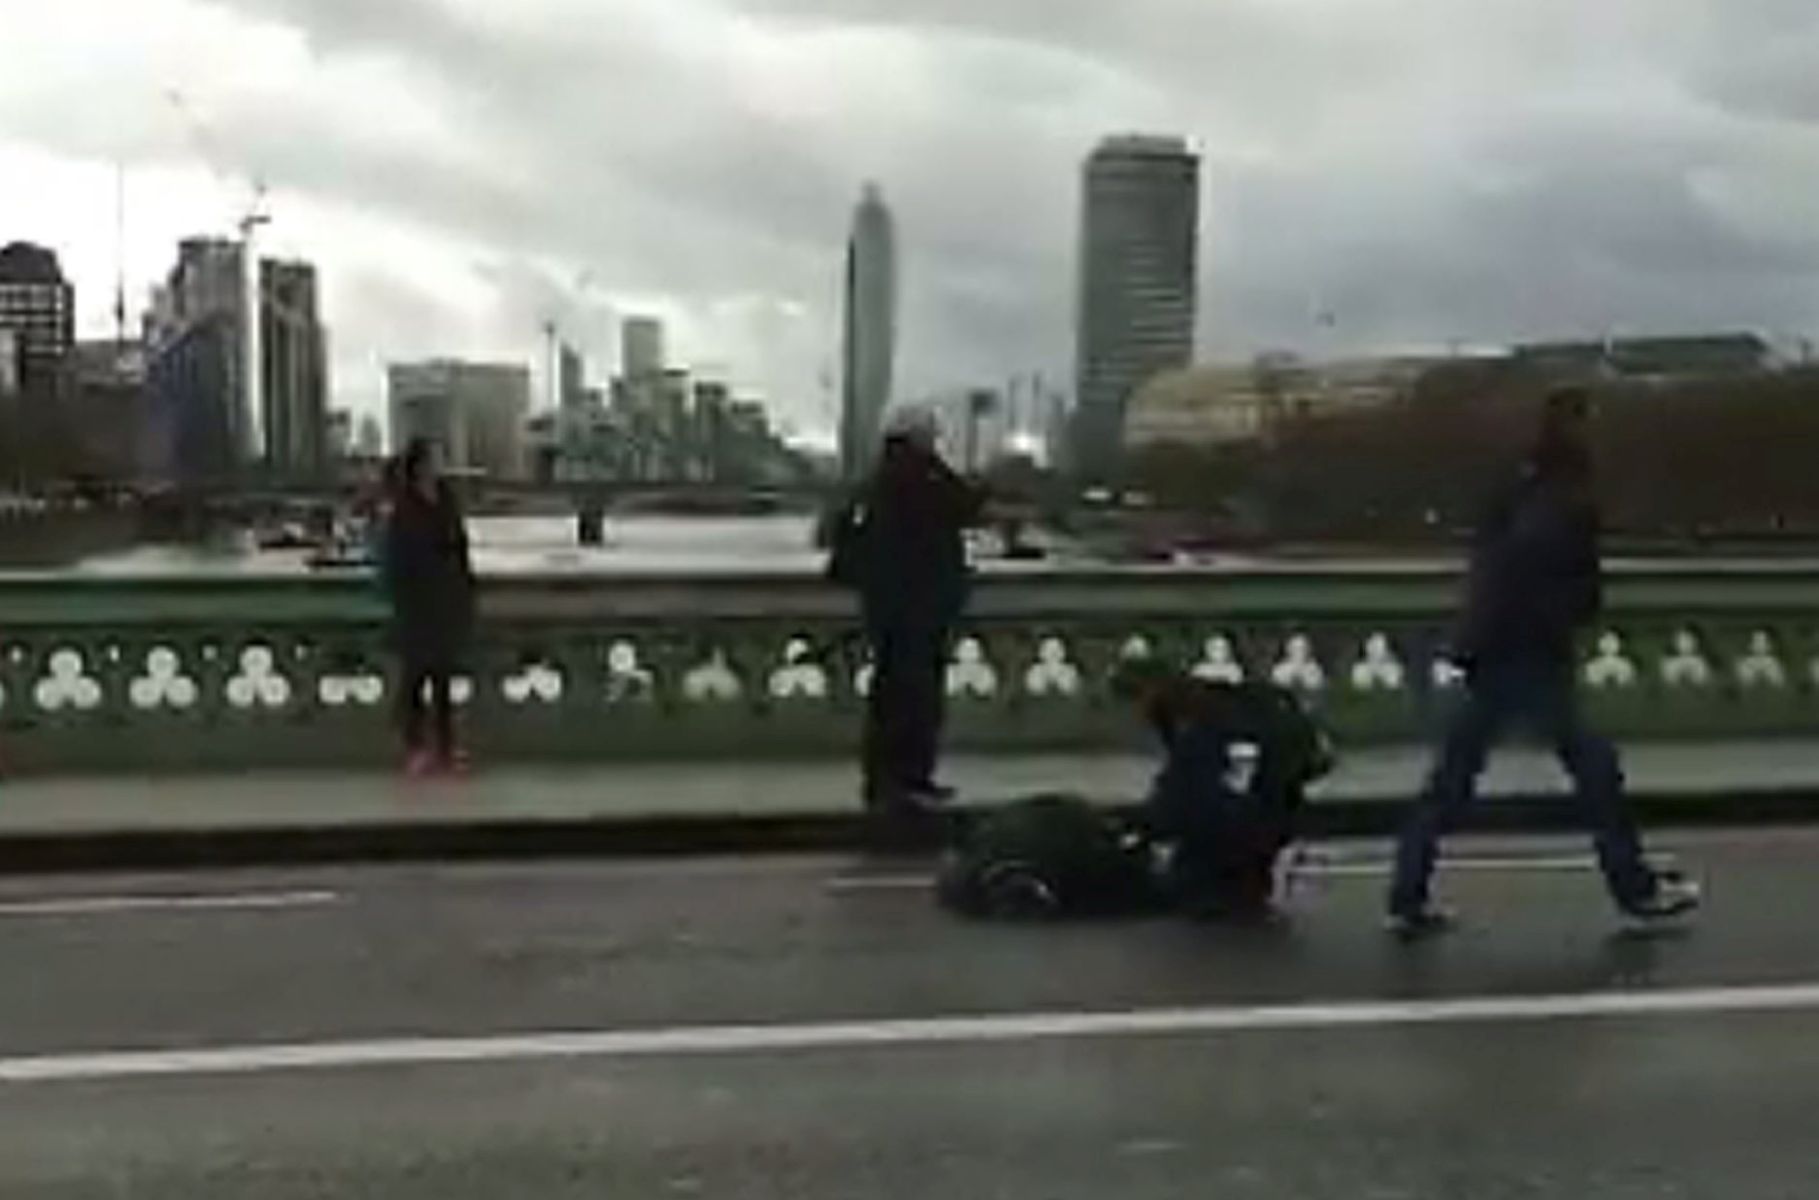 epa05863613 A video grabbed still image, made available by former Polish foreign minister Radoslav Sikorski, showing people attending to a an unured person at the Wstminster Bridge, near the Houses of Parliament in central London, Britain 22 March 2017. Scotland Yard said on 22 March 21017 the police were called to a firearms incident in the Westminister palace grounds and on Westminster Bridge amid reports of several people injured in central London.  EPA/RADOSLAV SIKORSKI BEST QUALITY AVAILABLE